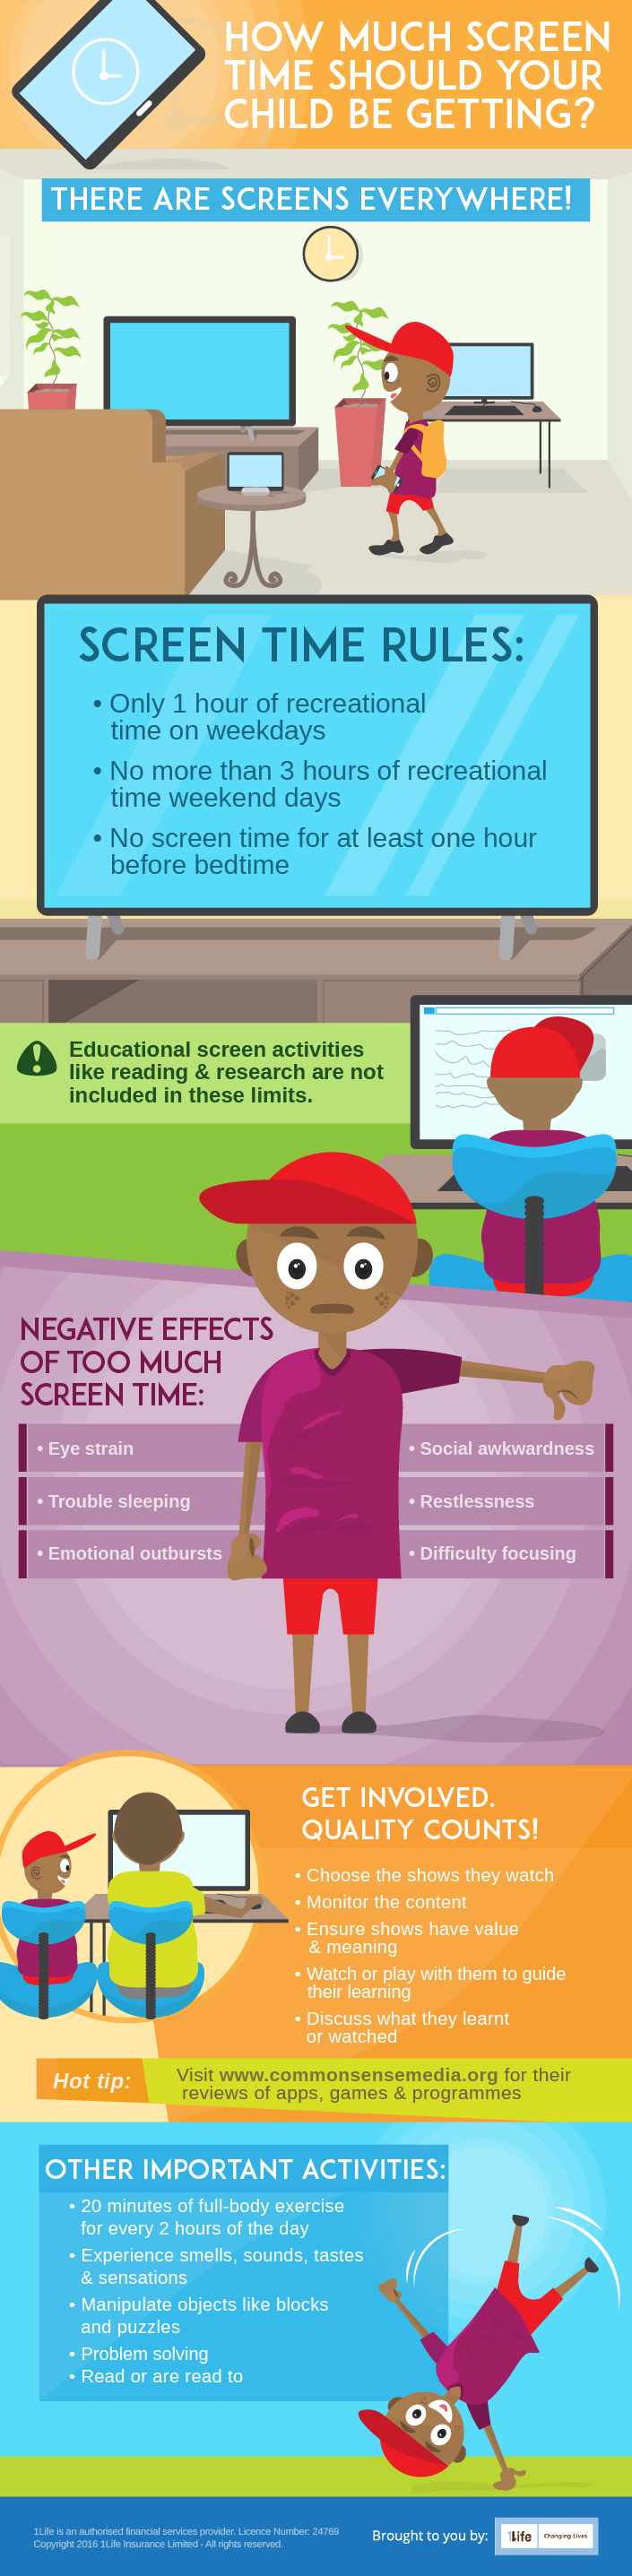 How much screen time should your child be getting? 